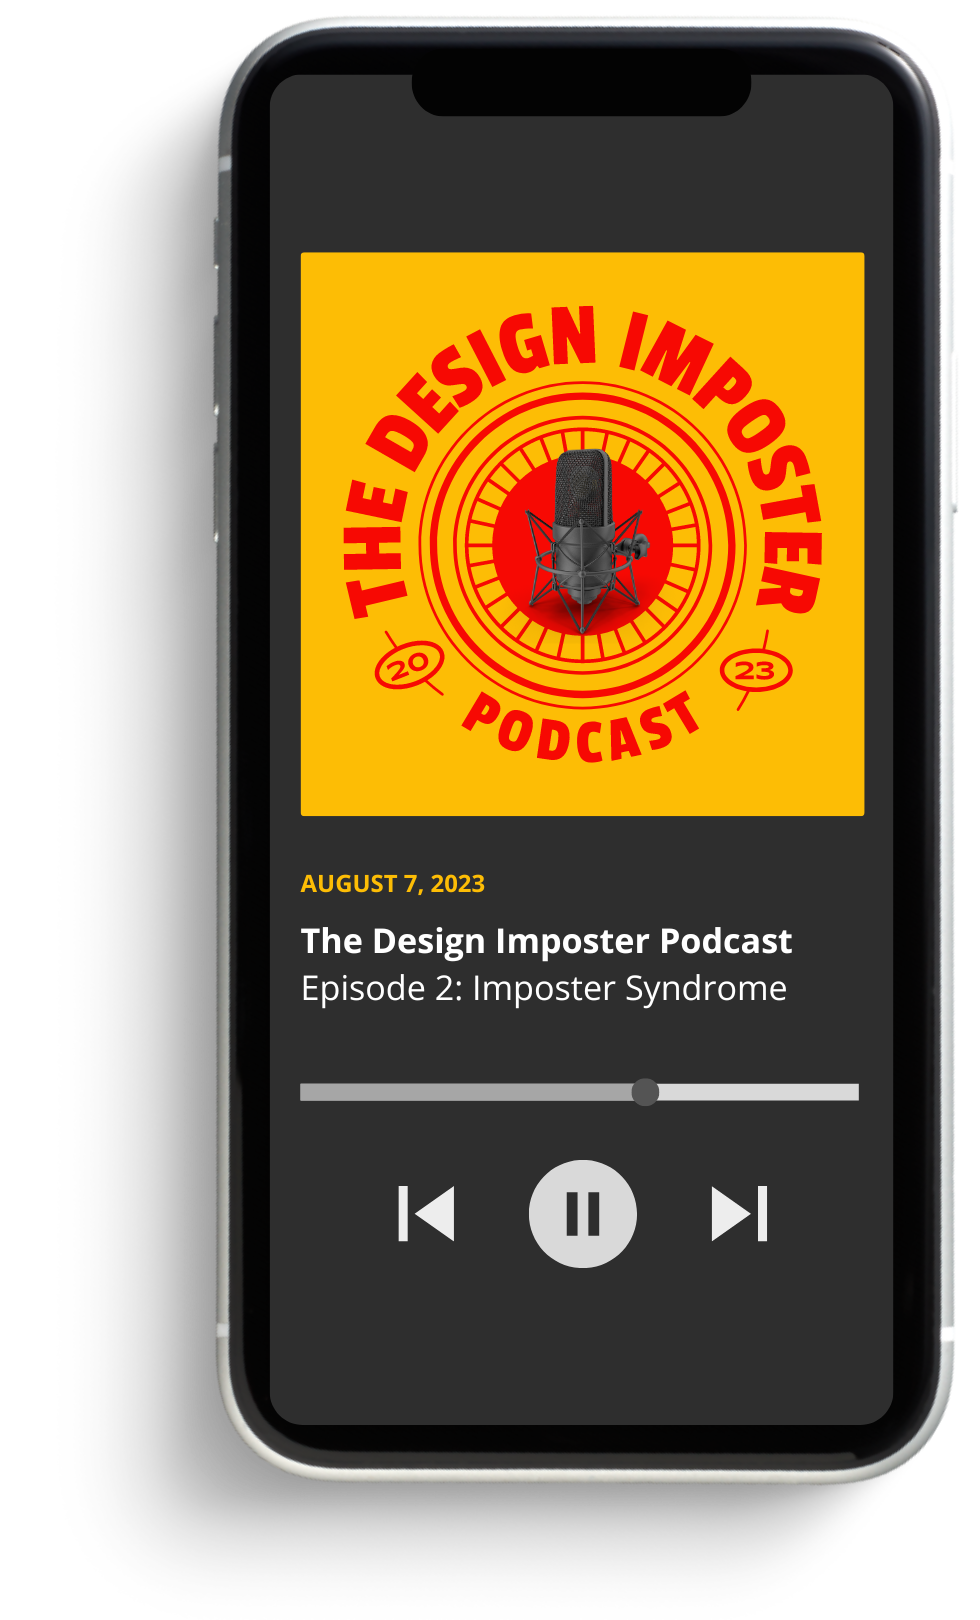 Design Imposter Podcast Iphone Mockup